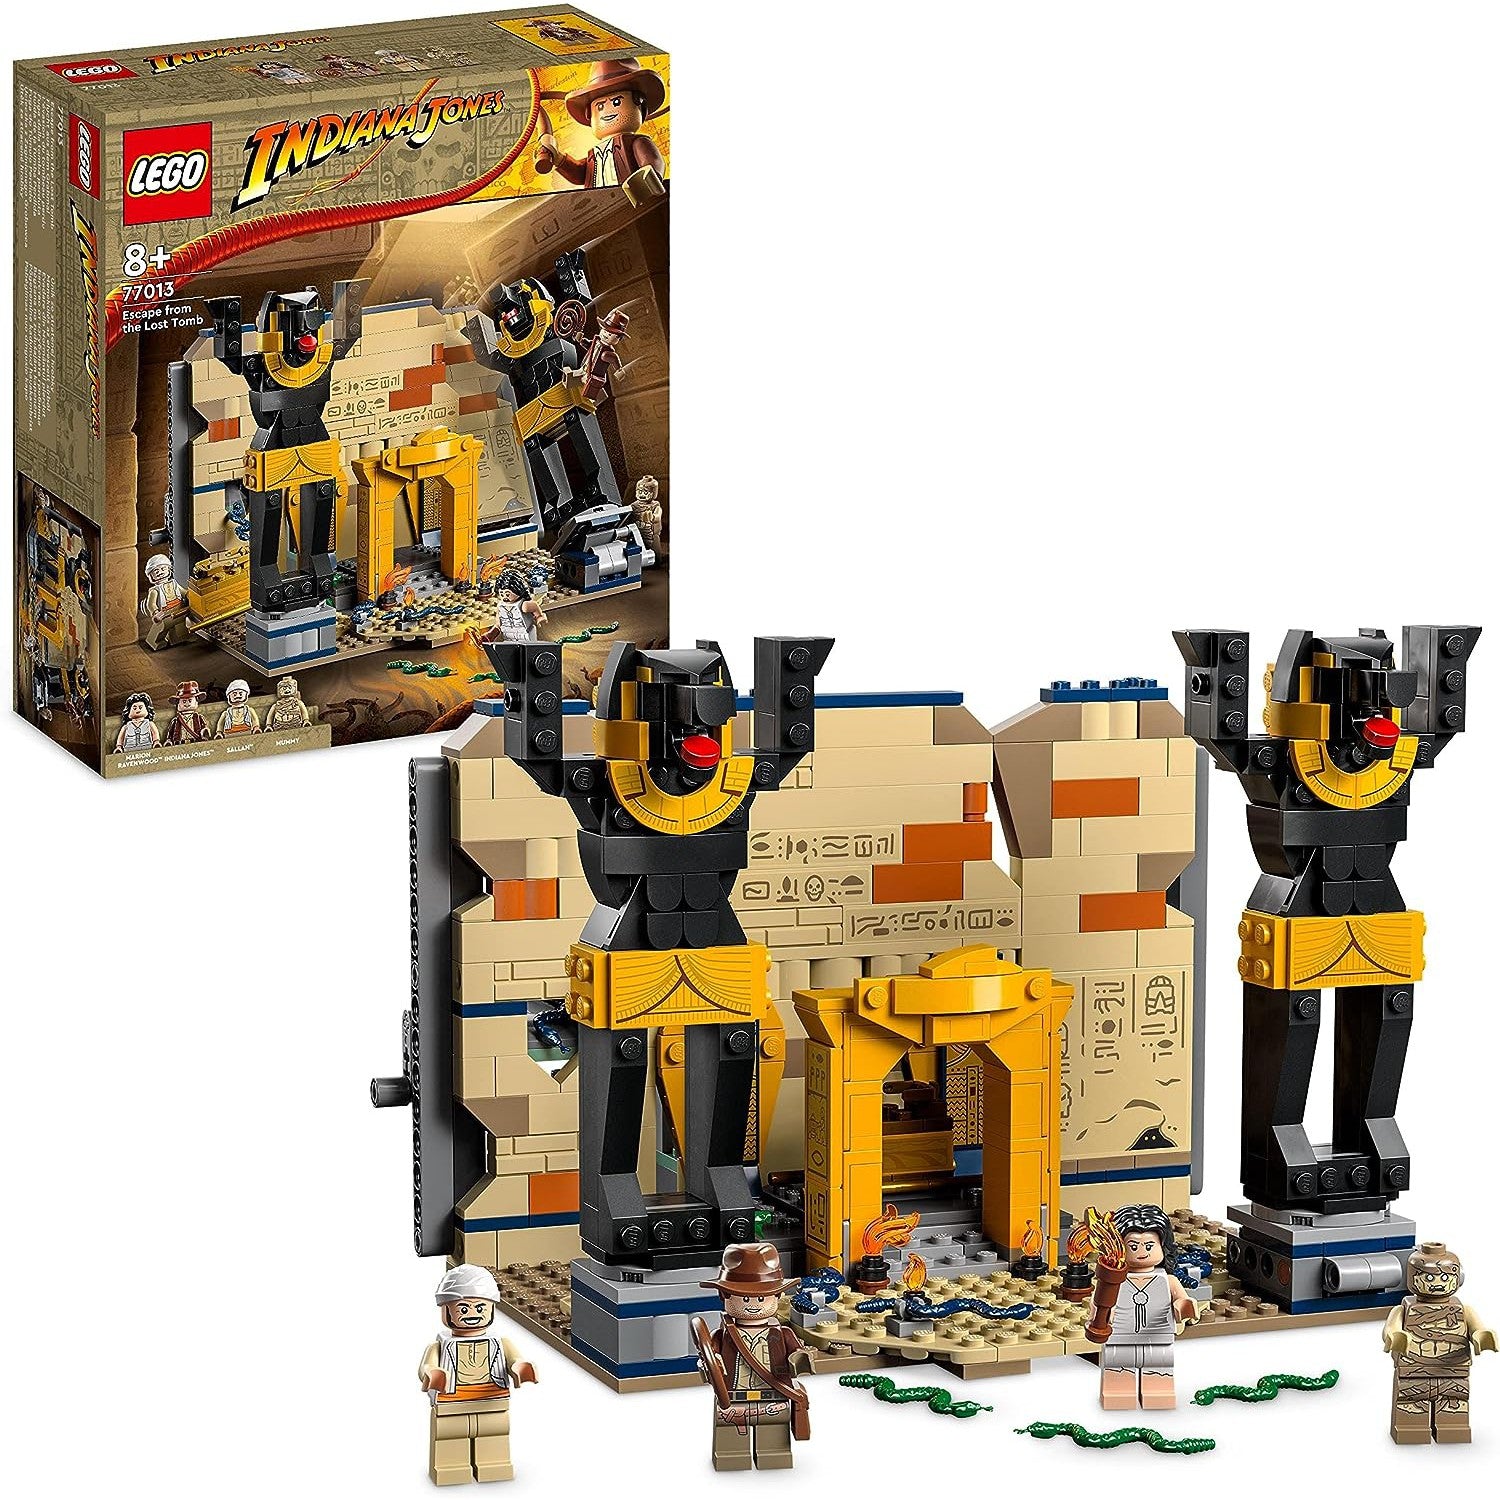 Lego 77013 Indiana Jones Escape from the Lost Tomb